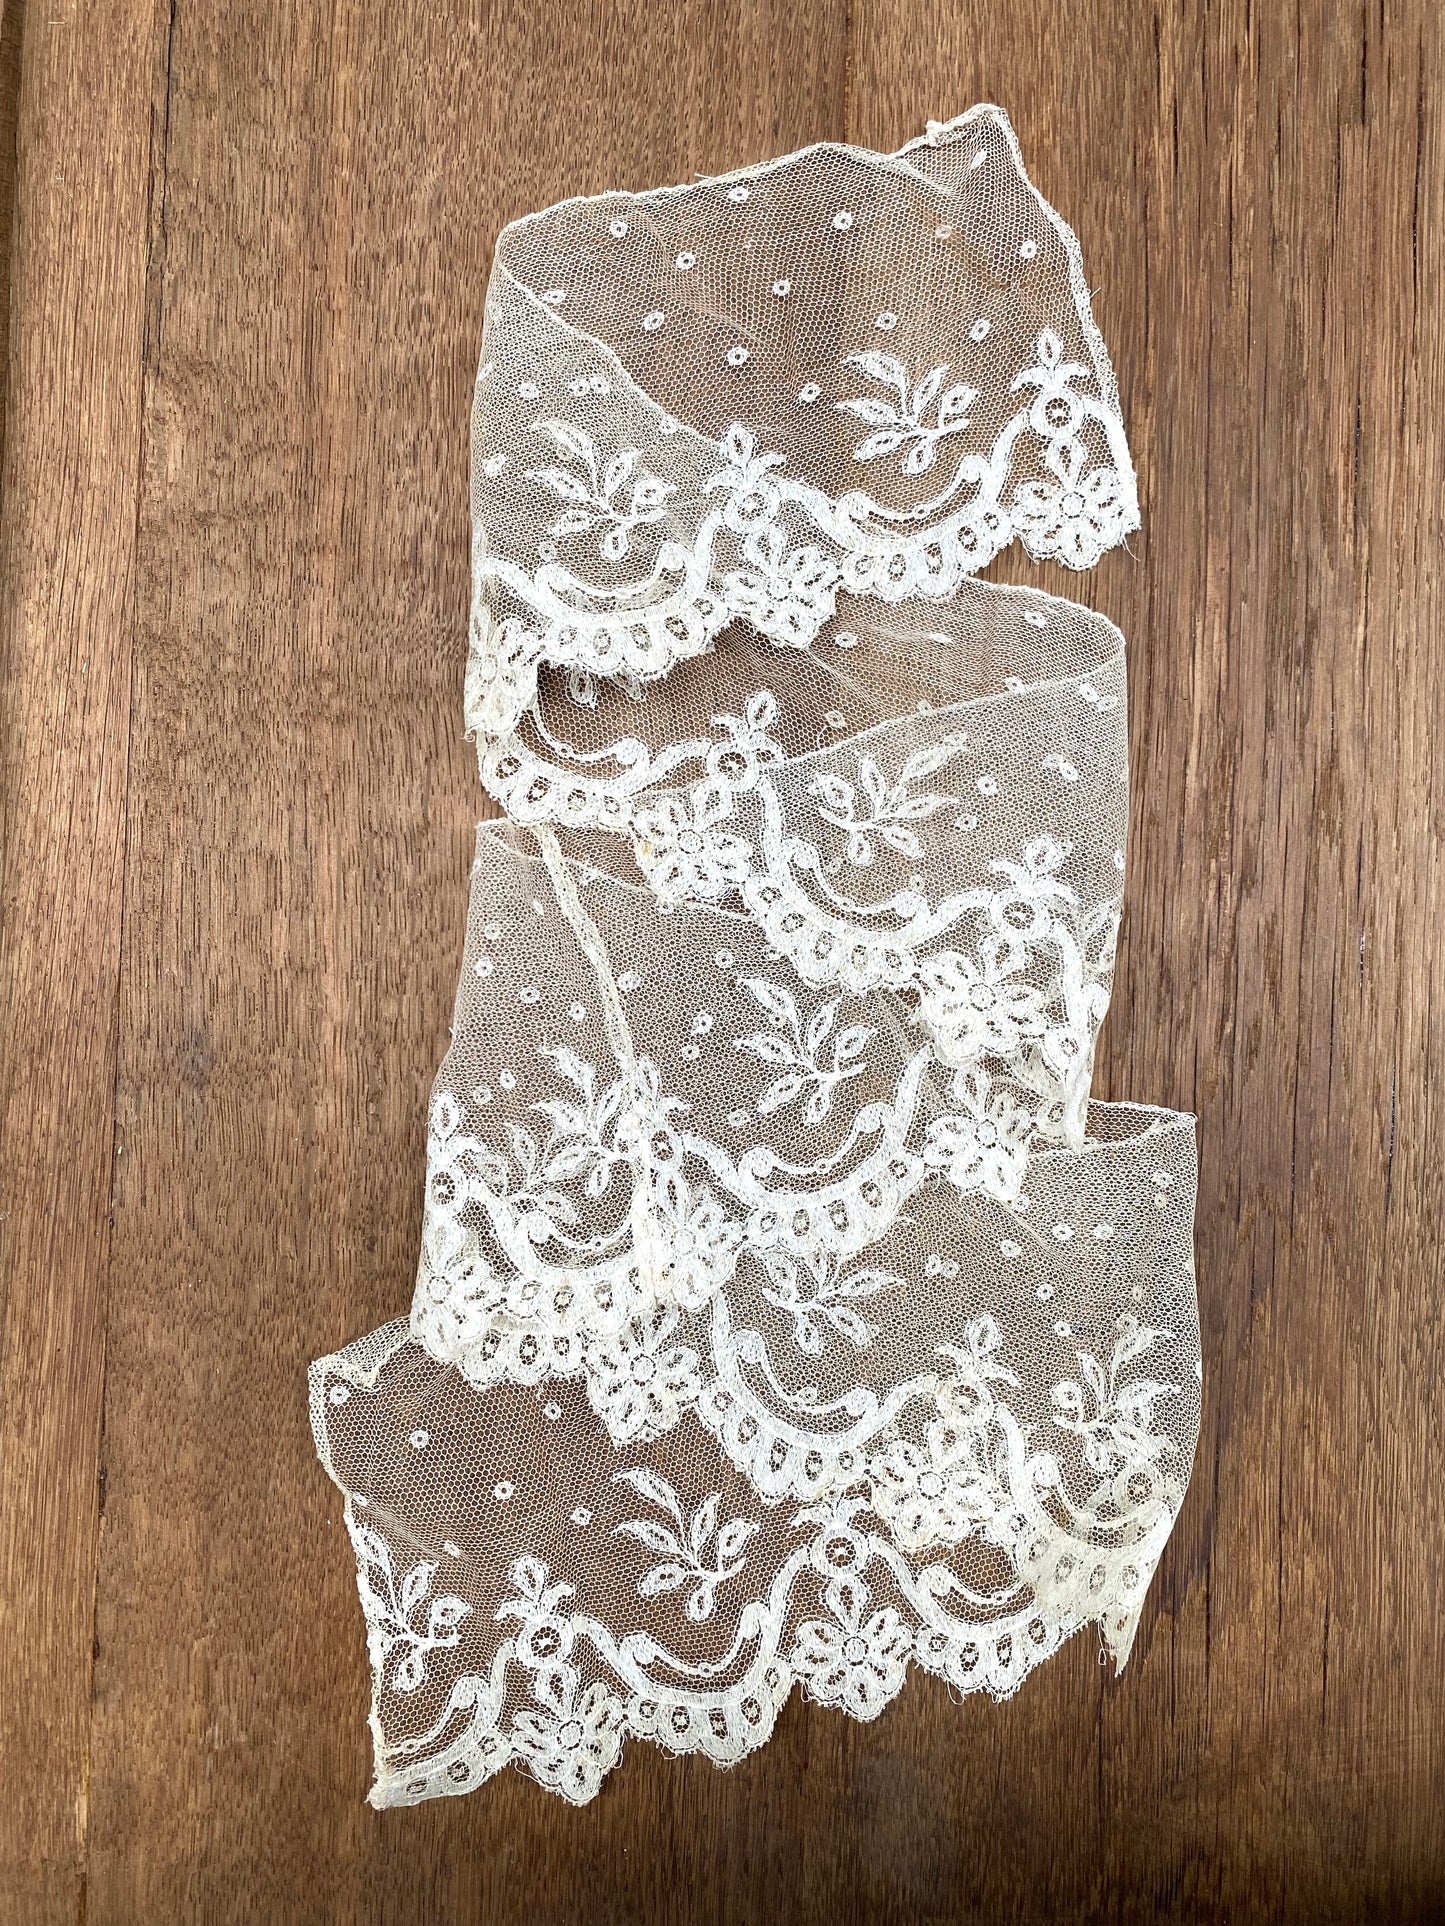 Antique French Polka Dot Lace Piece